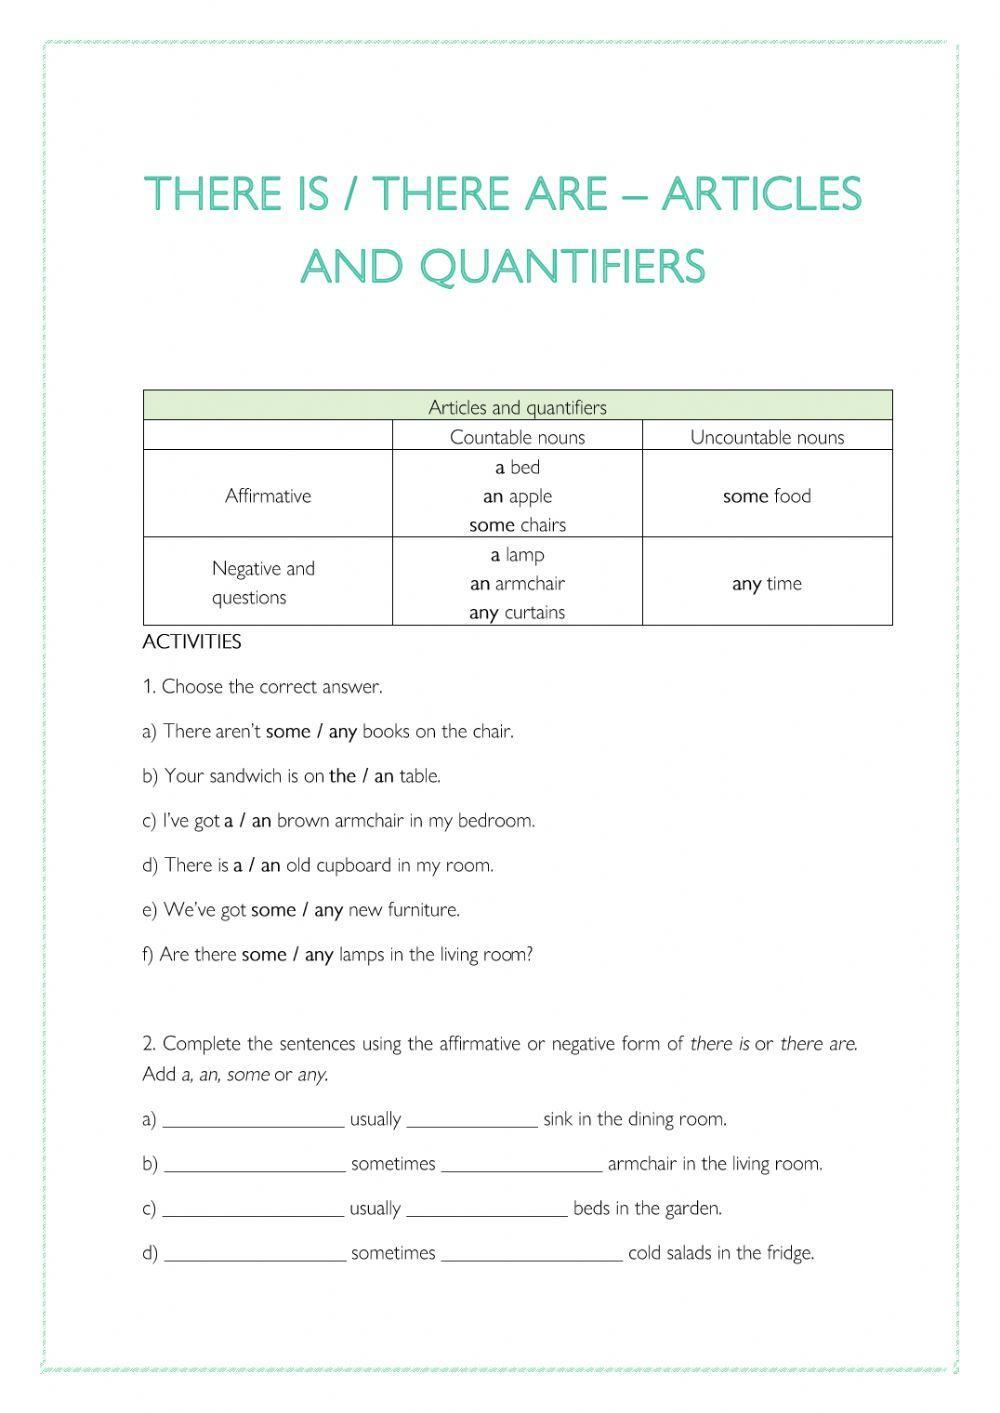 Articles and quantifiers